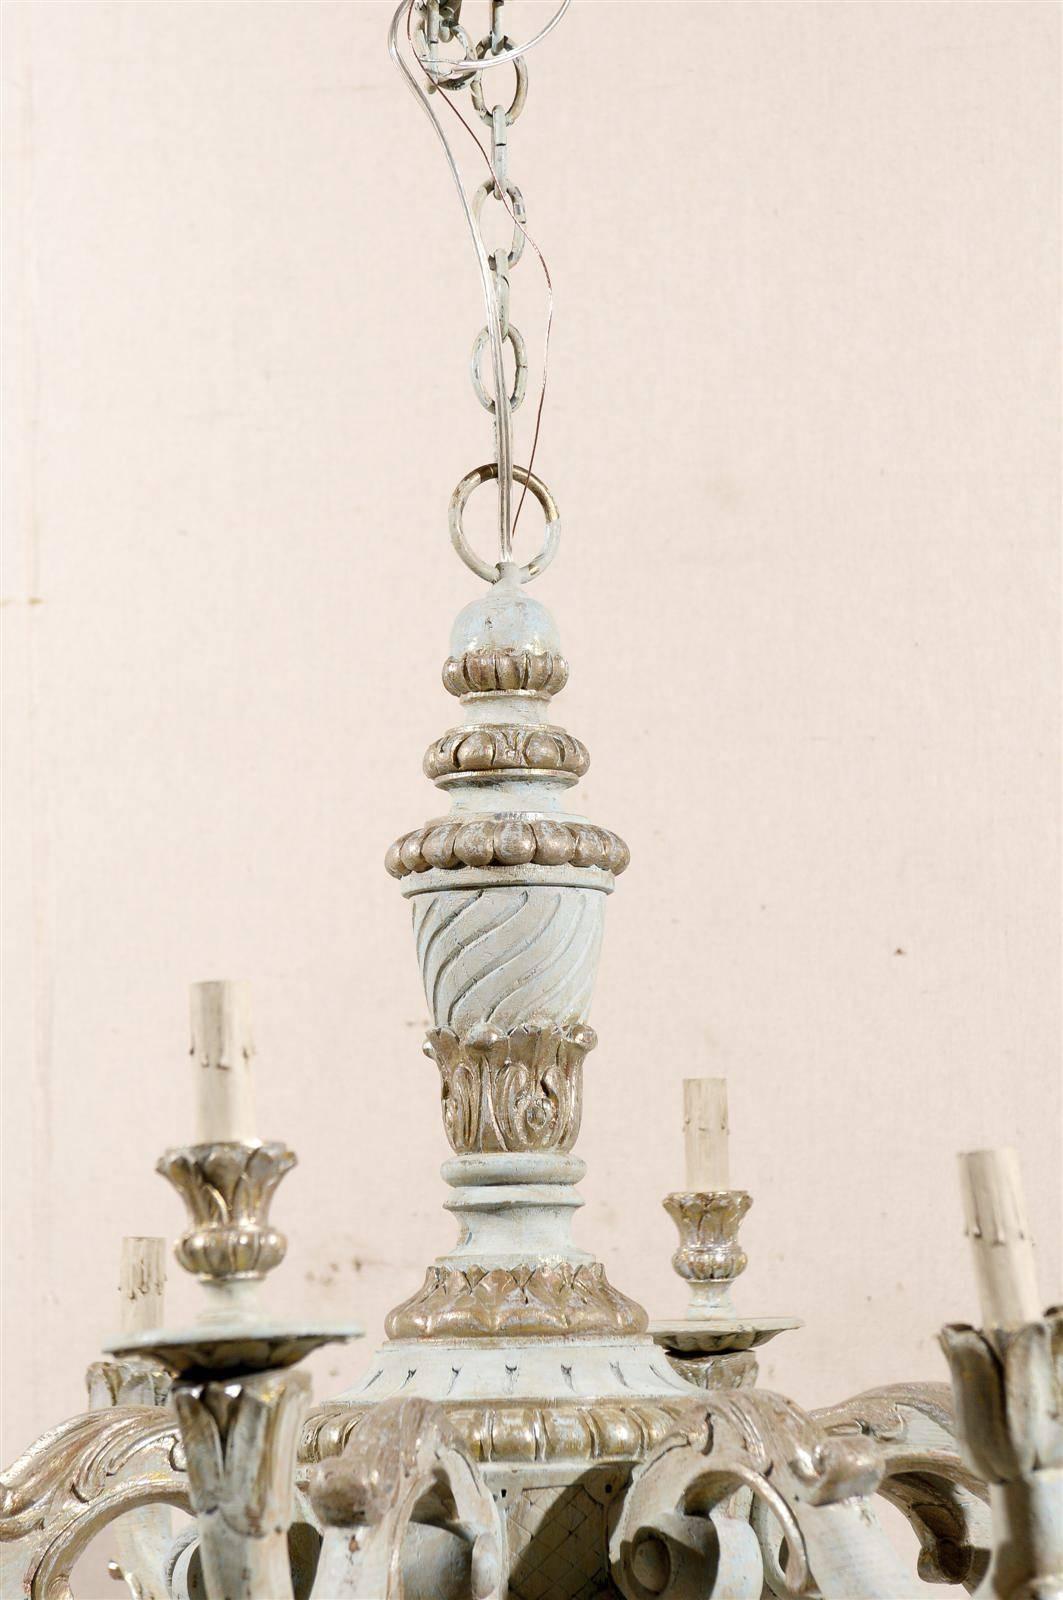 Painted French Vintage Eight-Light Wooden Chandelier with Scrolled Arms